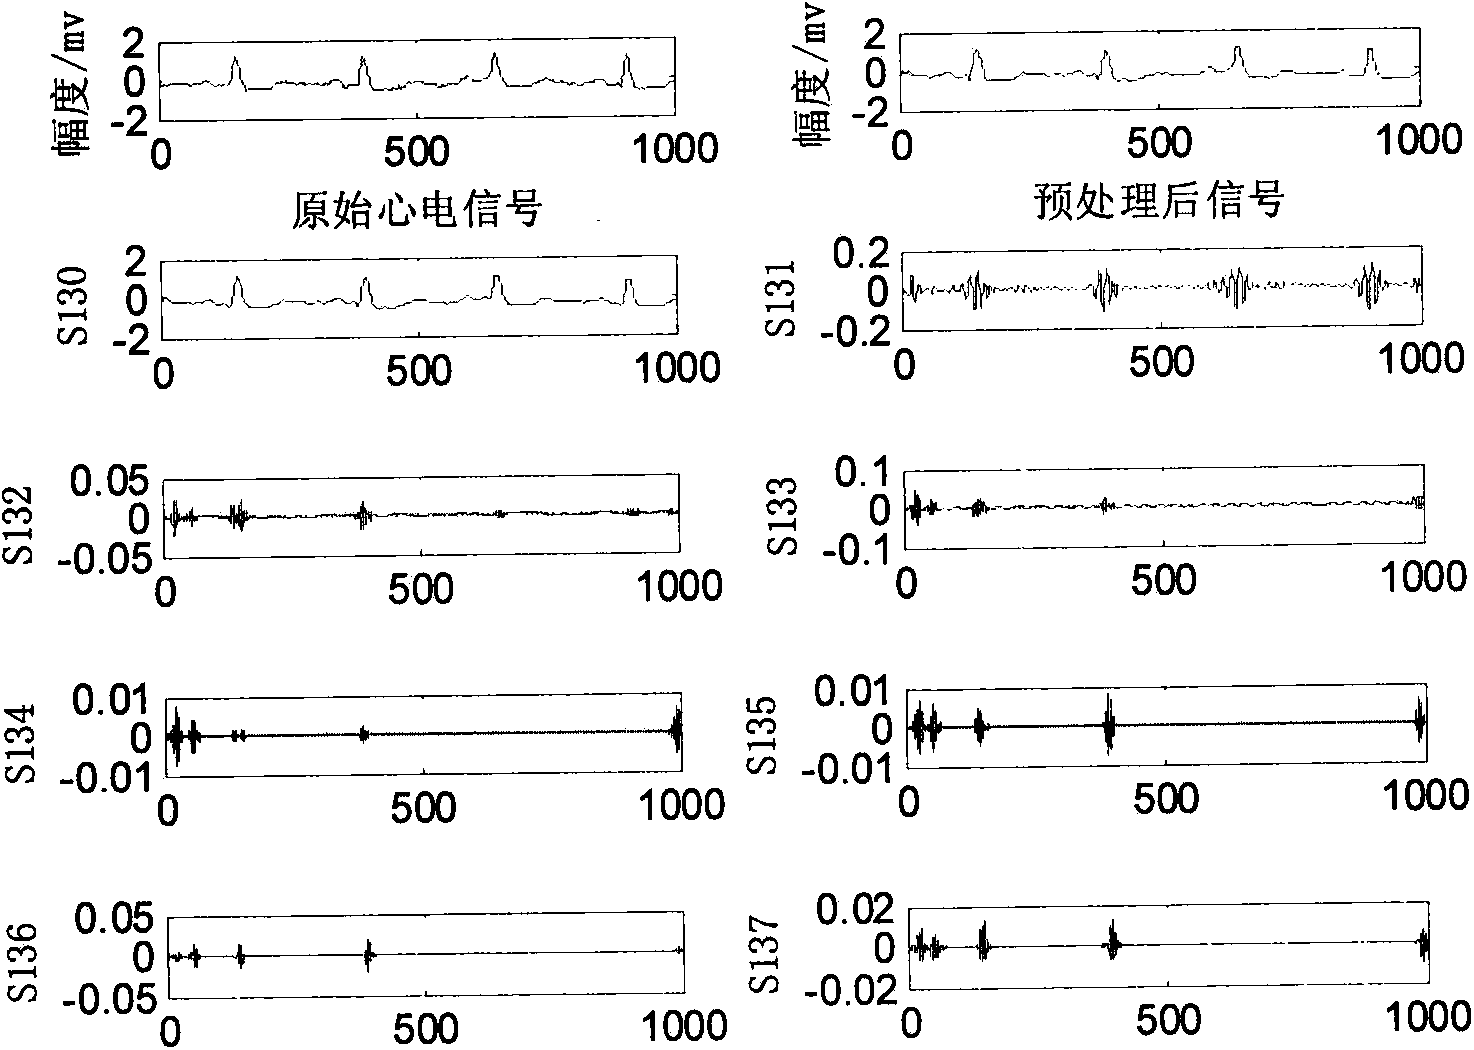 ECG signal classifying method based on wavelet packet and approximate entropy